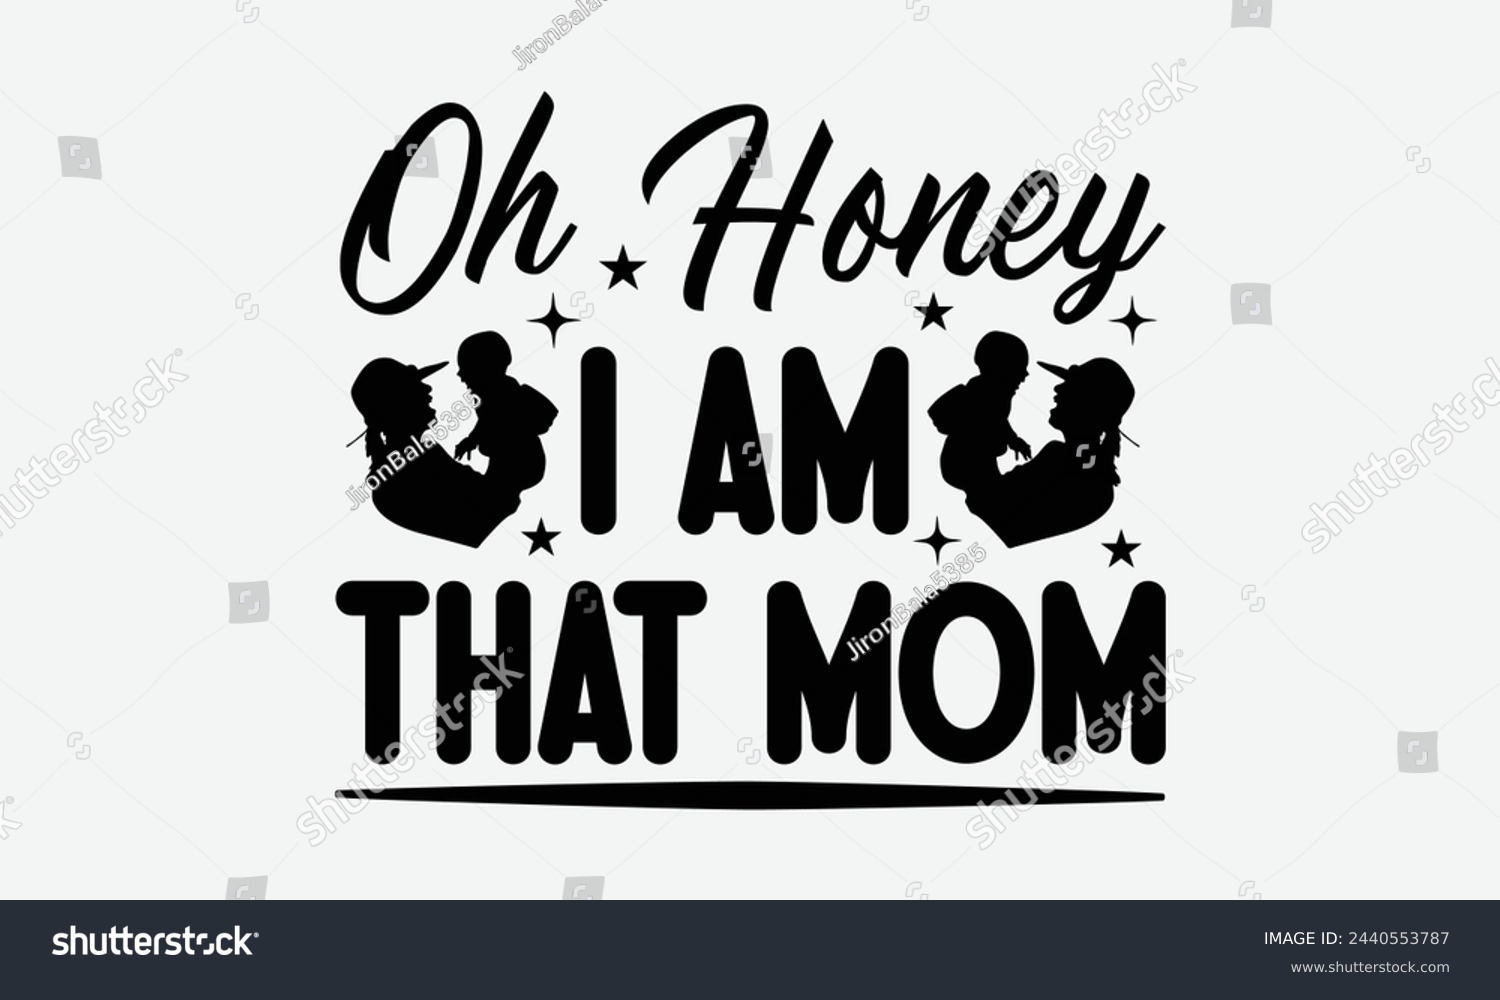 SVG of Oh honey i am that mom - Mom t-shirt design, isolated on white background, this illustration can be used as a print on t-shirts and bags, cover book, template, stationary or as a poster. svg